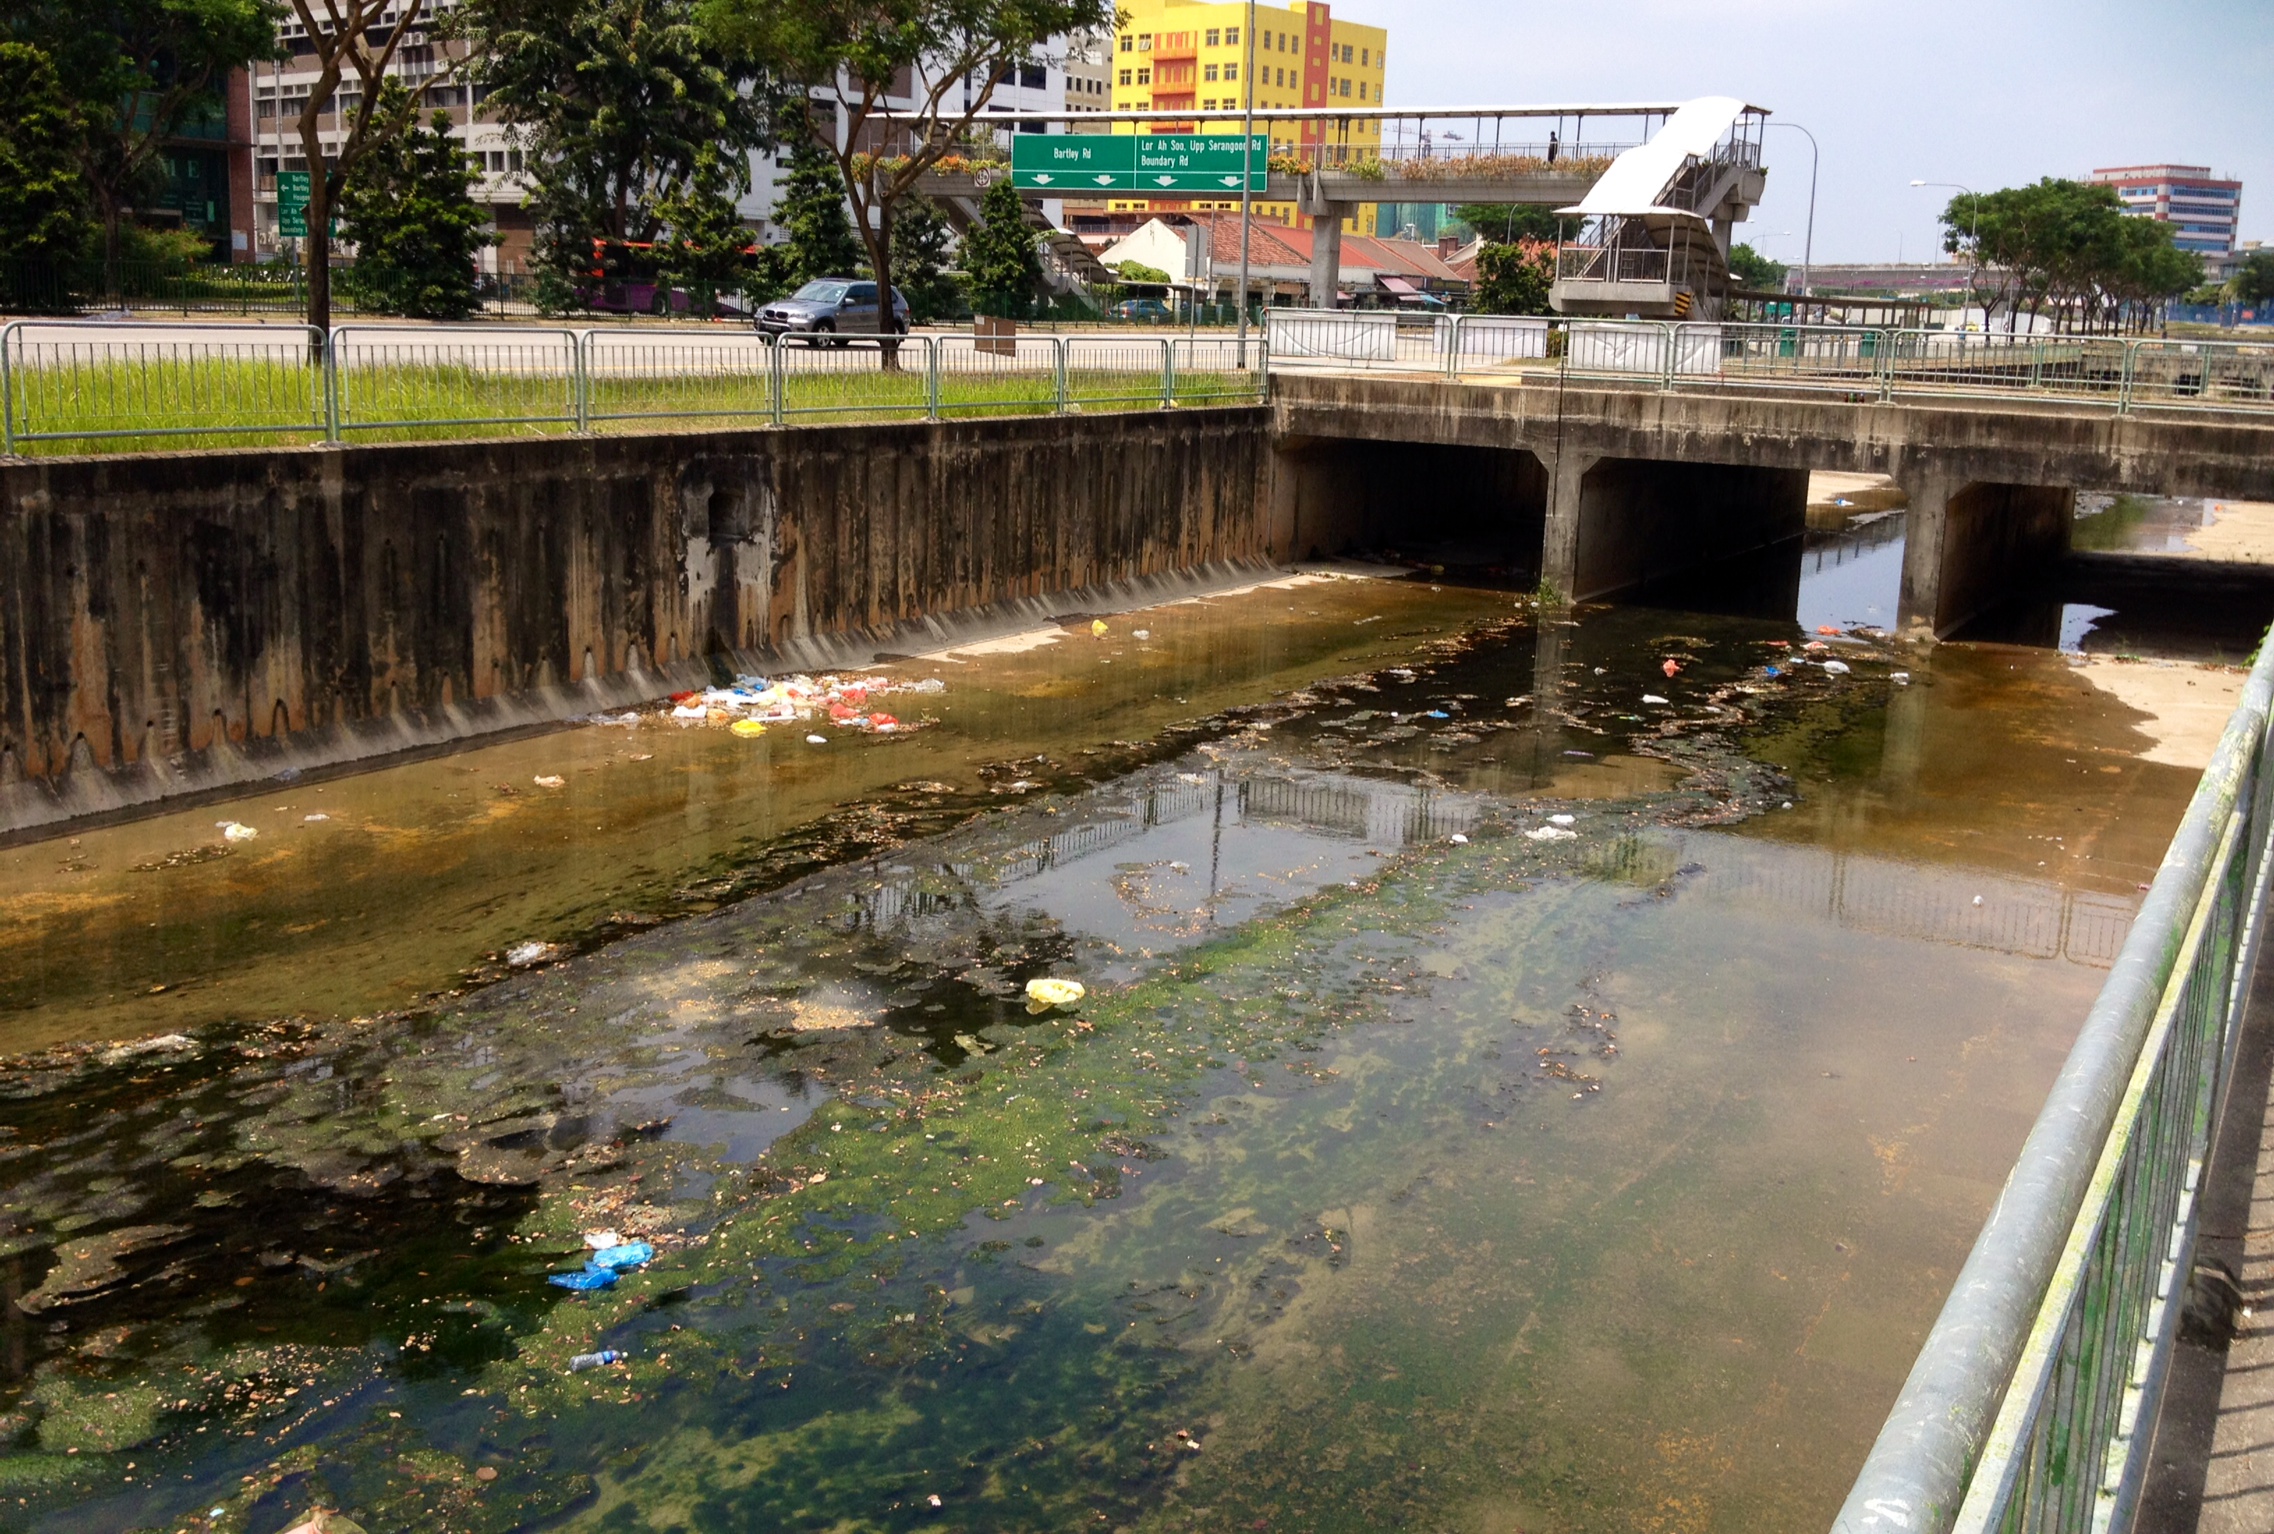 Thoughts on E-poll on Public Cleanliness for Sustainable Singapore Blueprint Review